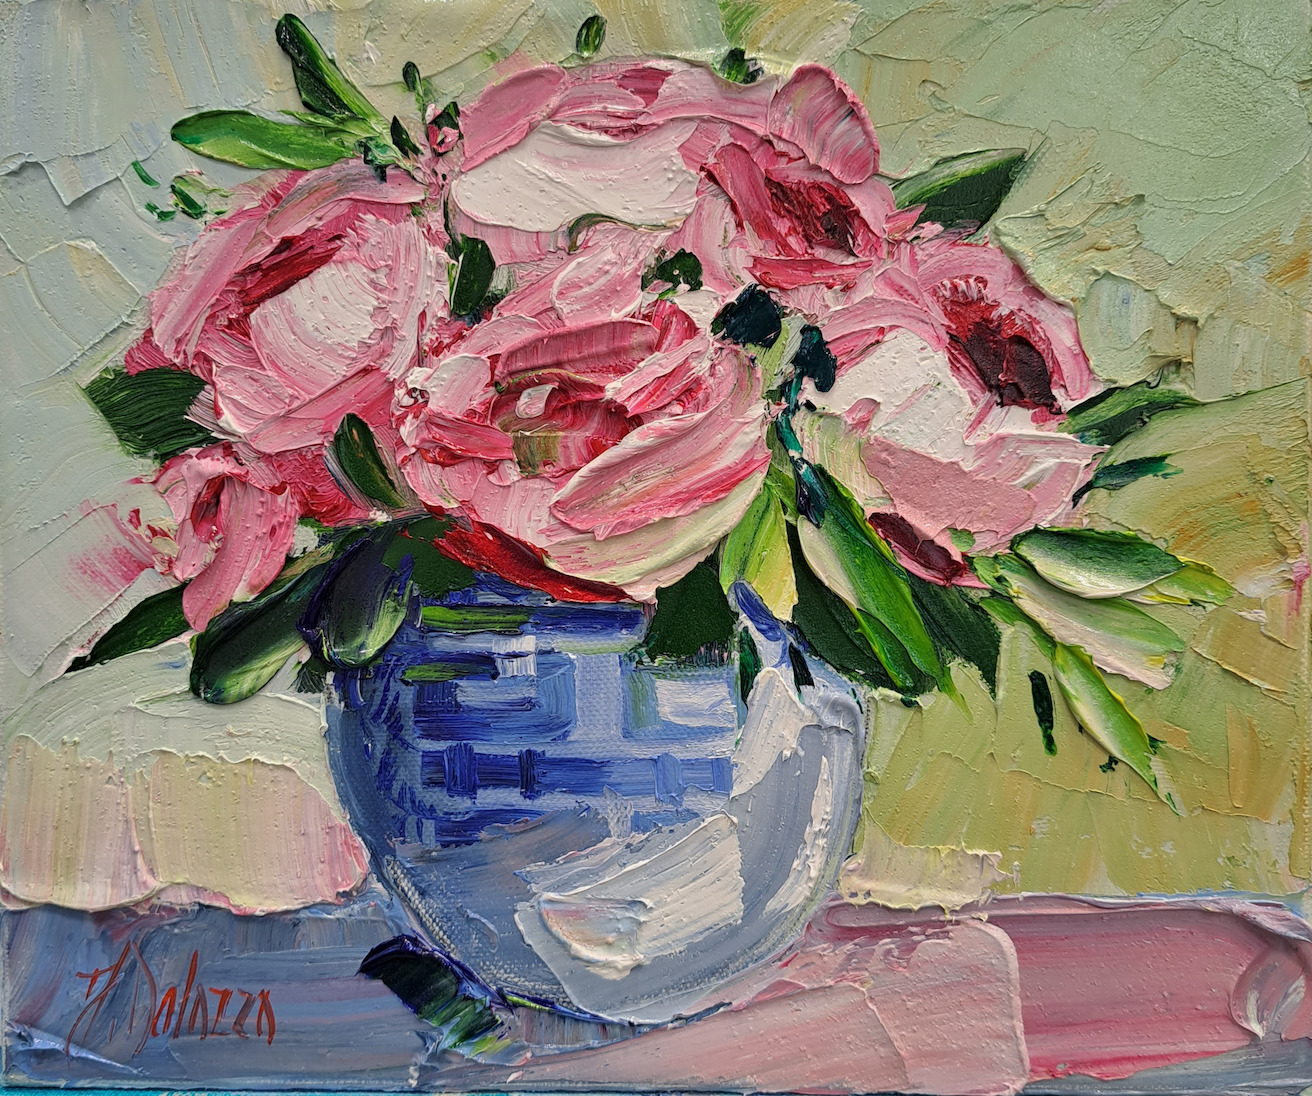 Creation Stage 5 Of Original Still Life Painting "Peonies in Ginger Jar" By Judith Dalozzo